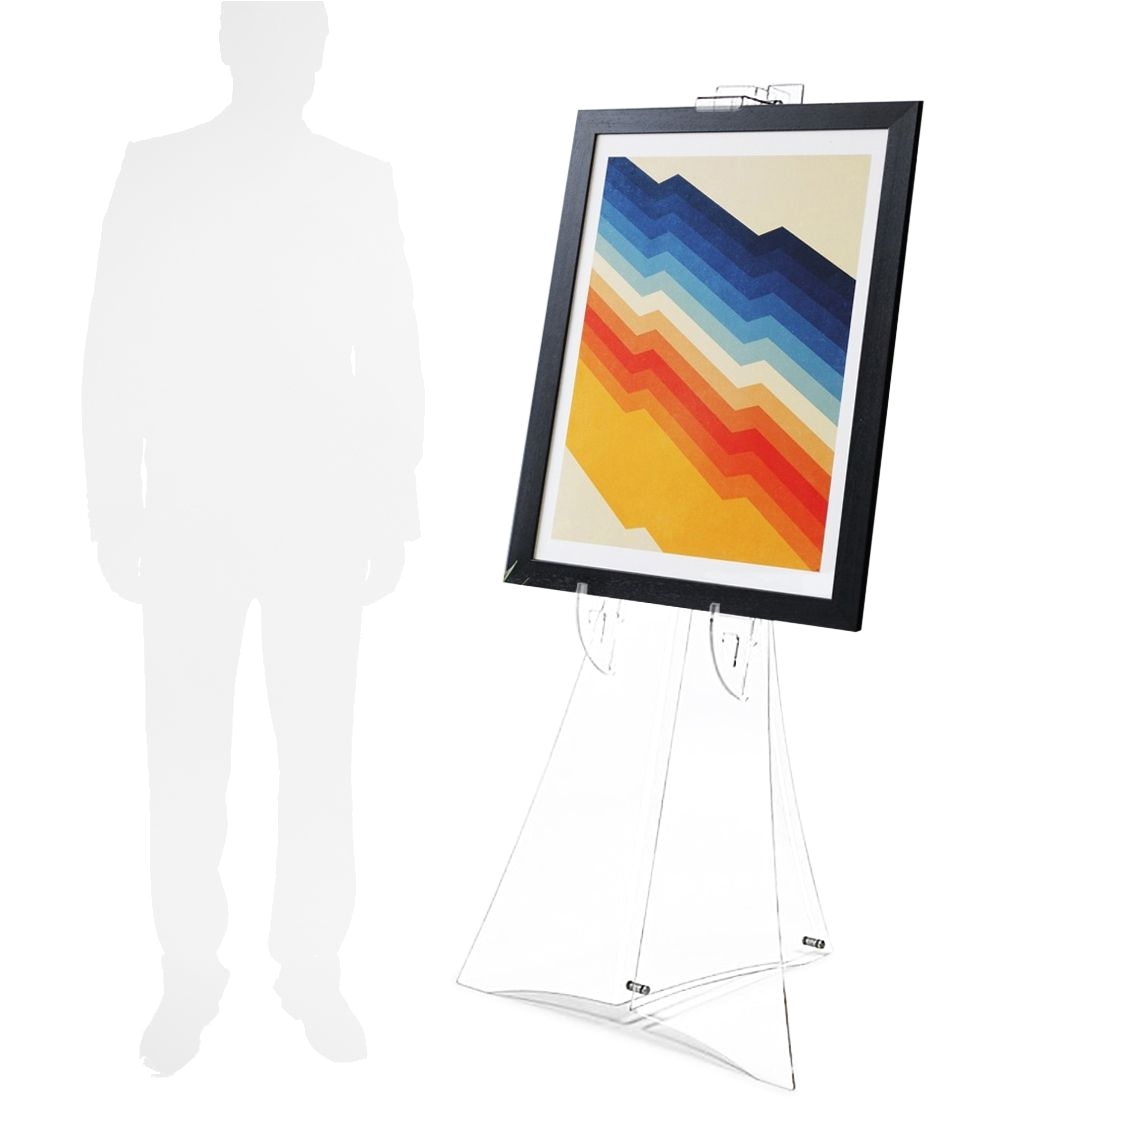 floor standing display easel perfect for showing large pieces of art or to display